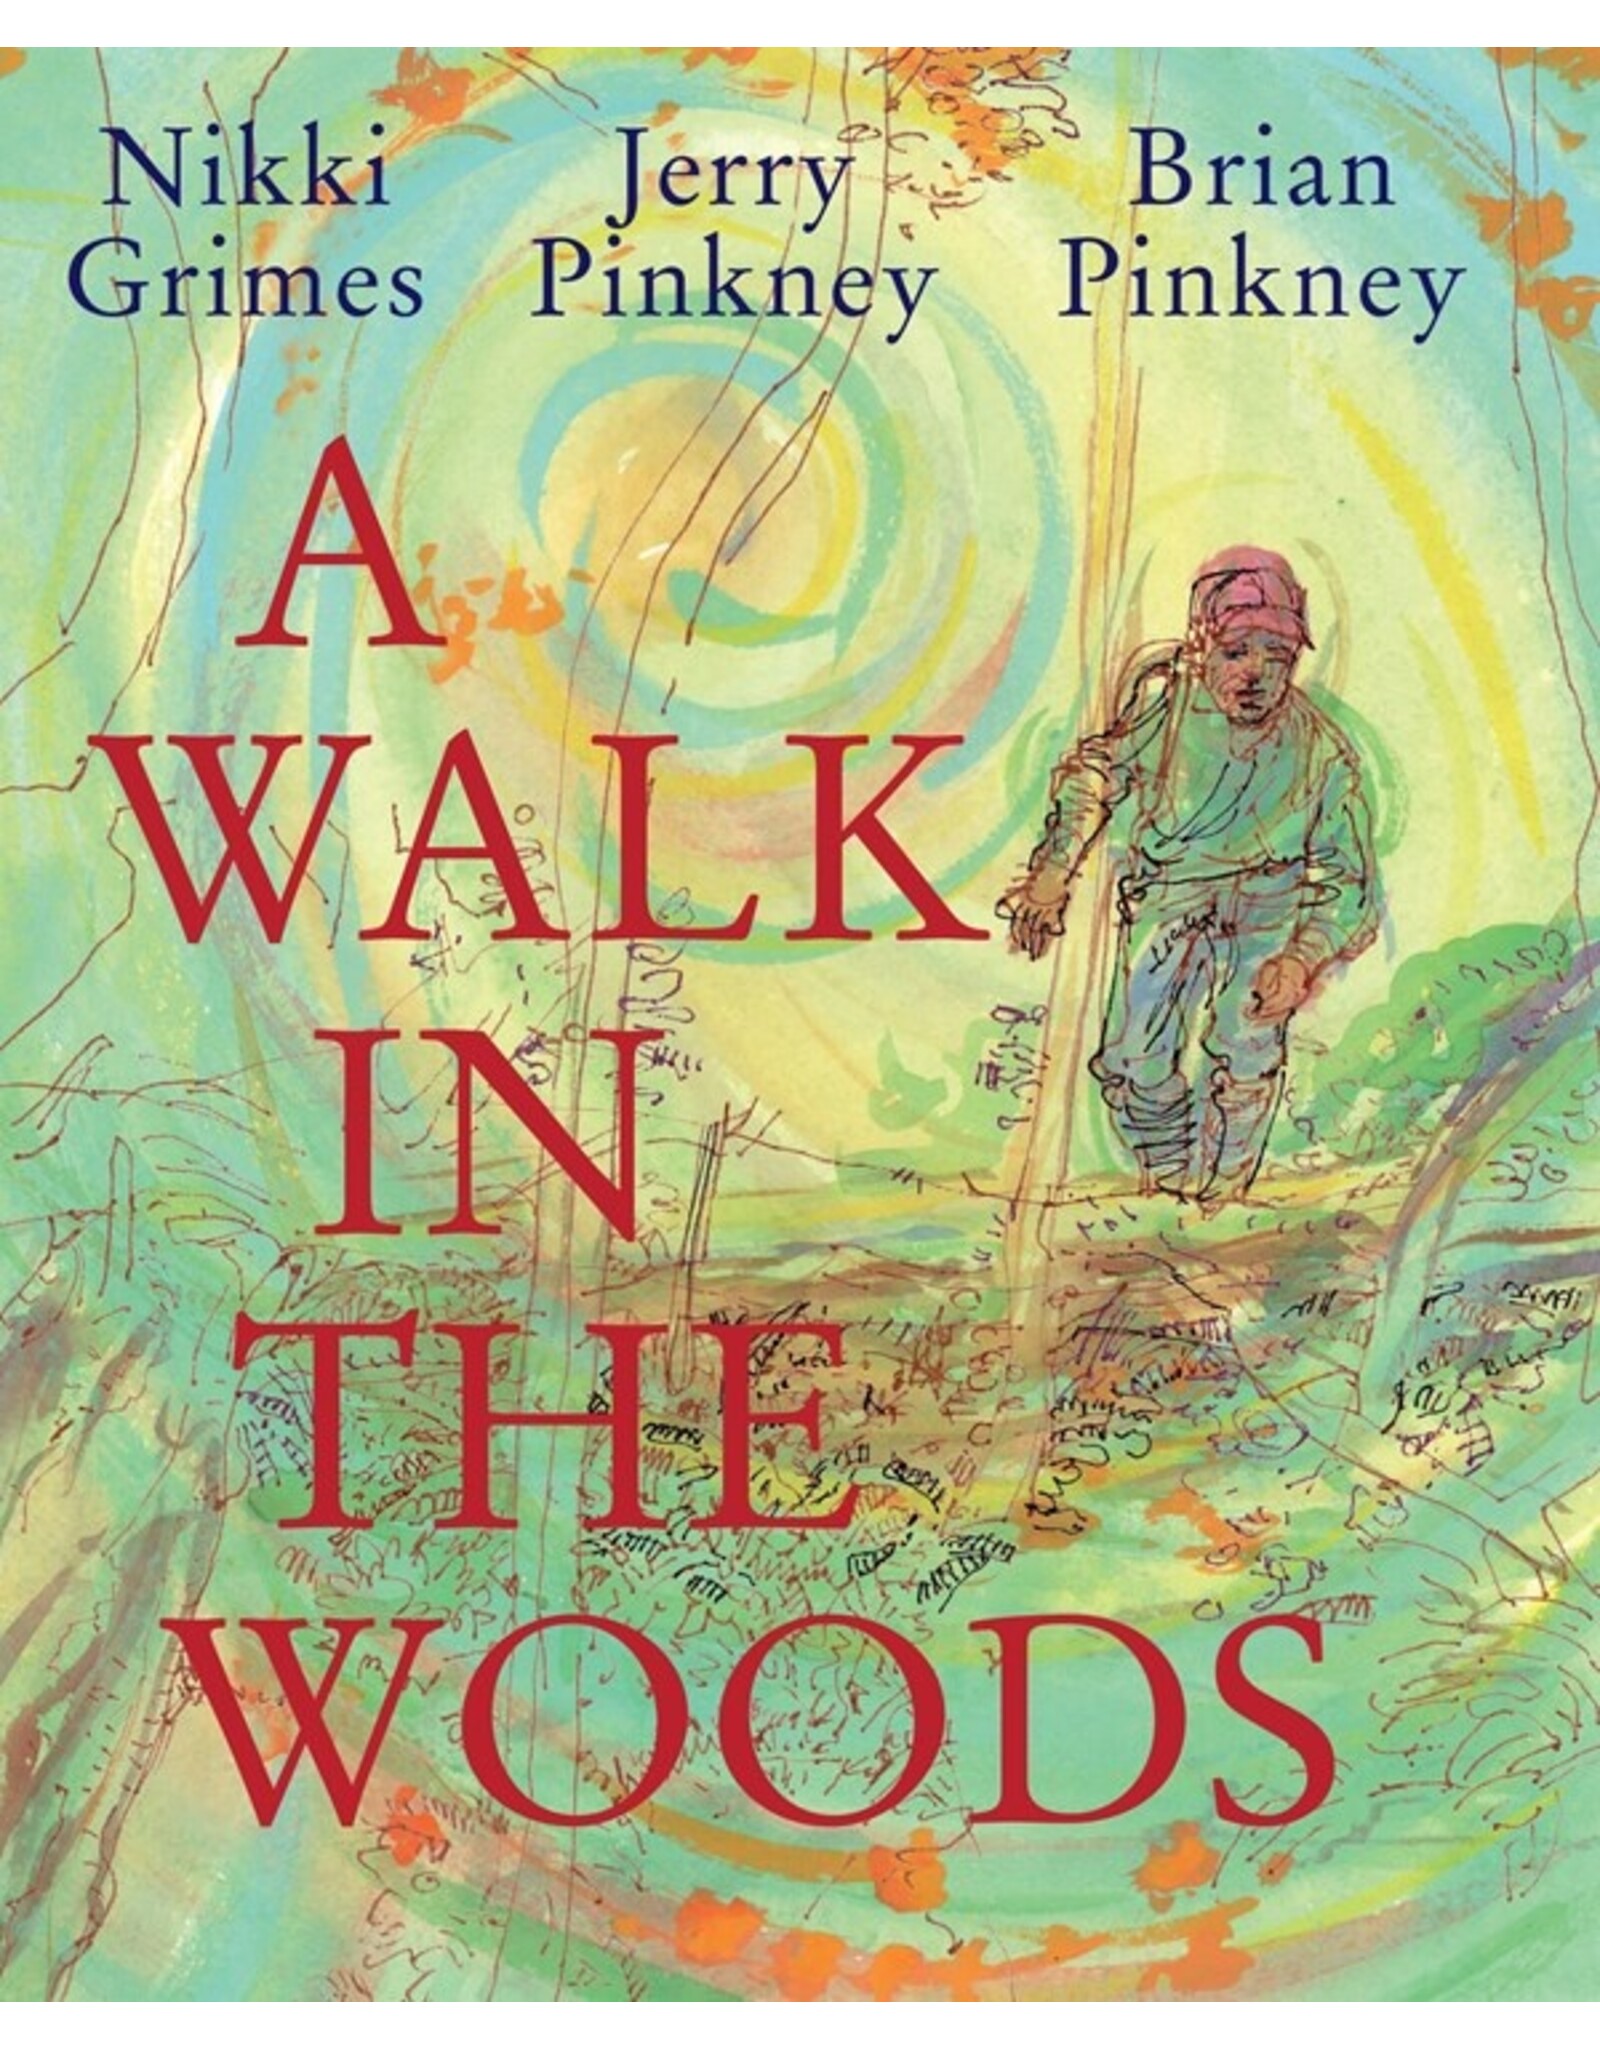 Books A Walk in the Woods by Nikki Grimes, Jerry Pinkney and Brian Pinkney